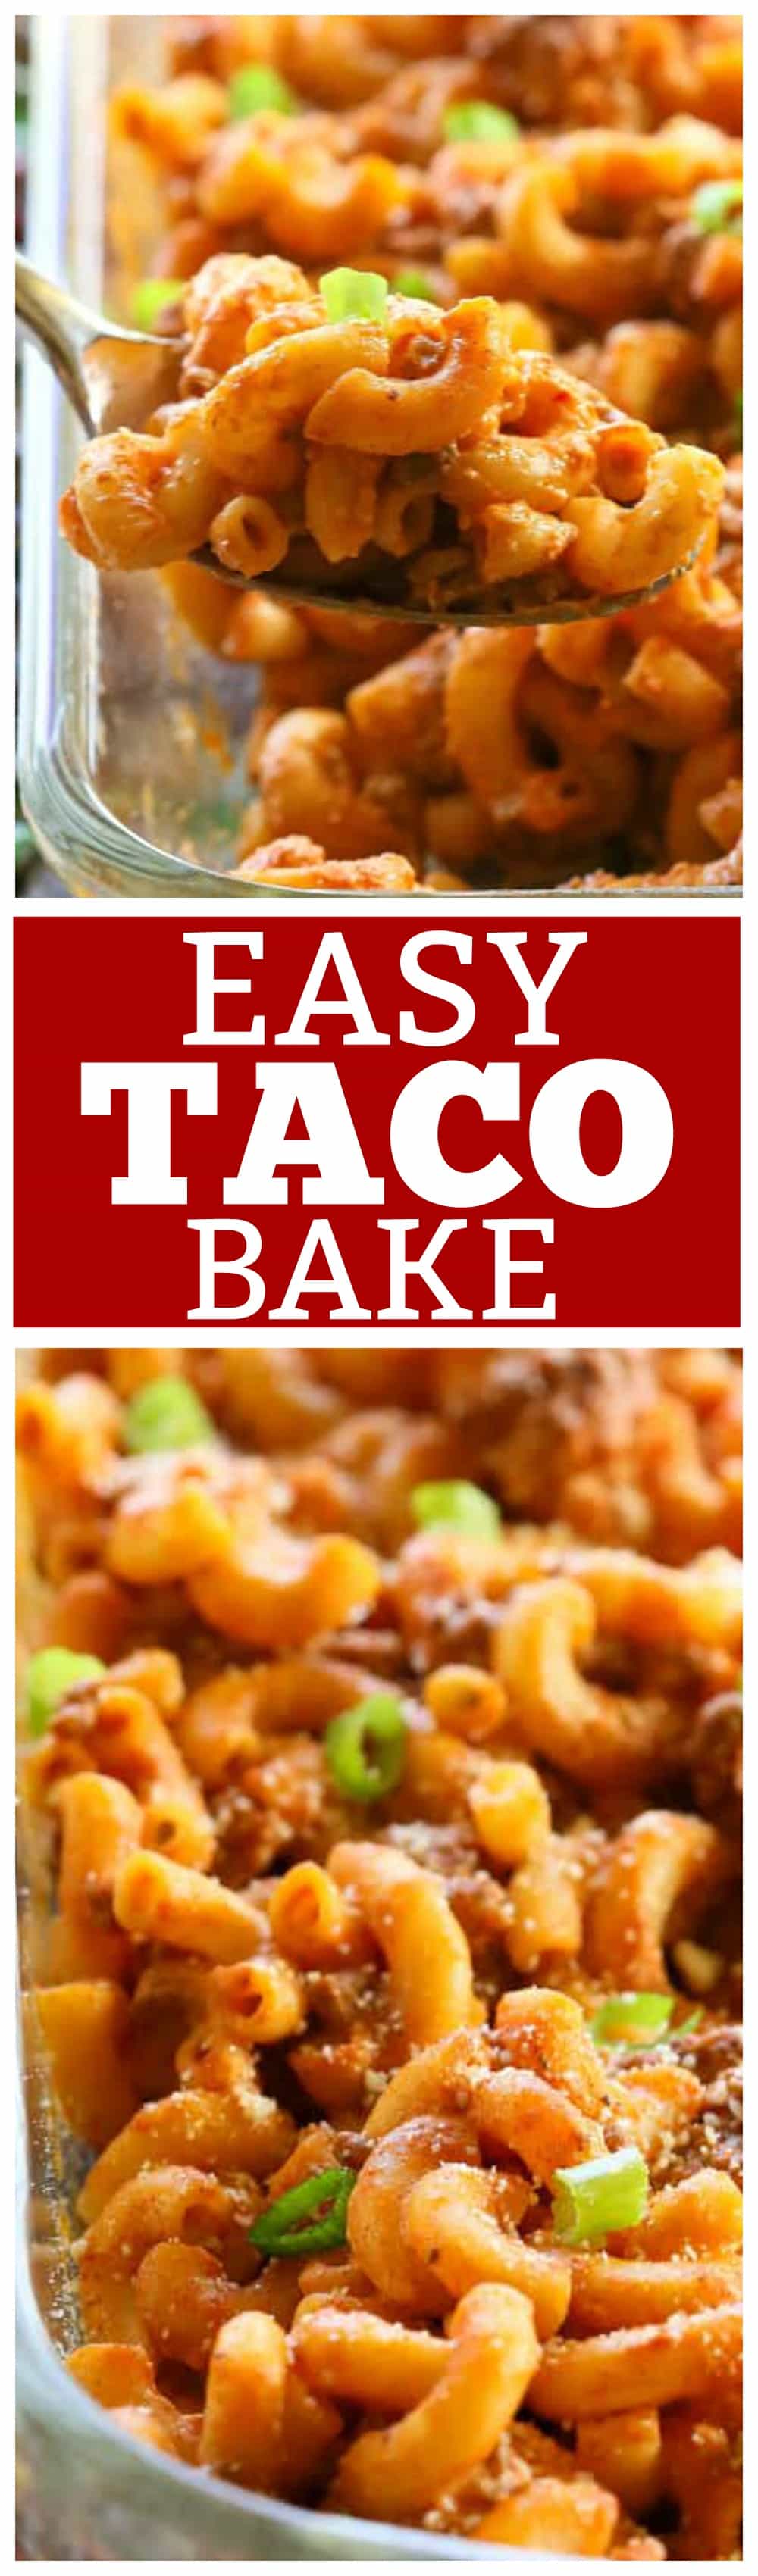 This Easy Taco Bake is a pasta dish that tastes just like a taco. It can easily be made ahead of time and freezes great. #easy #taco #bake #recipe